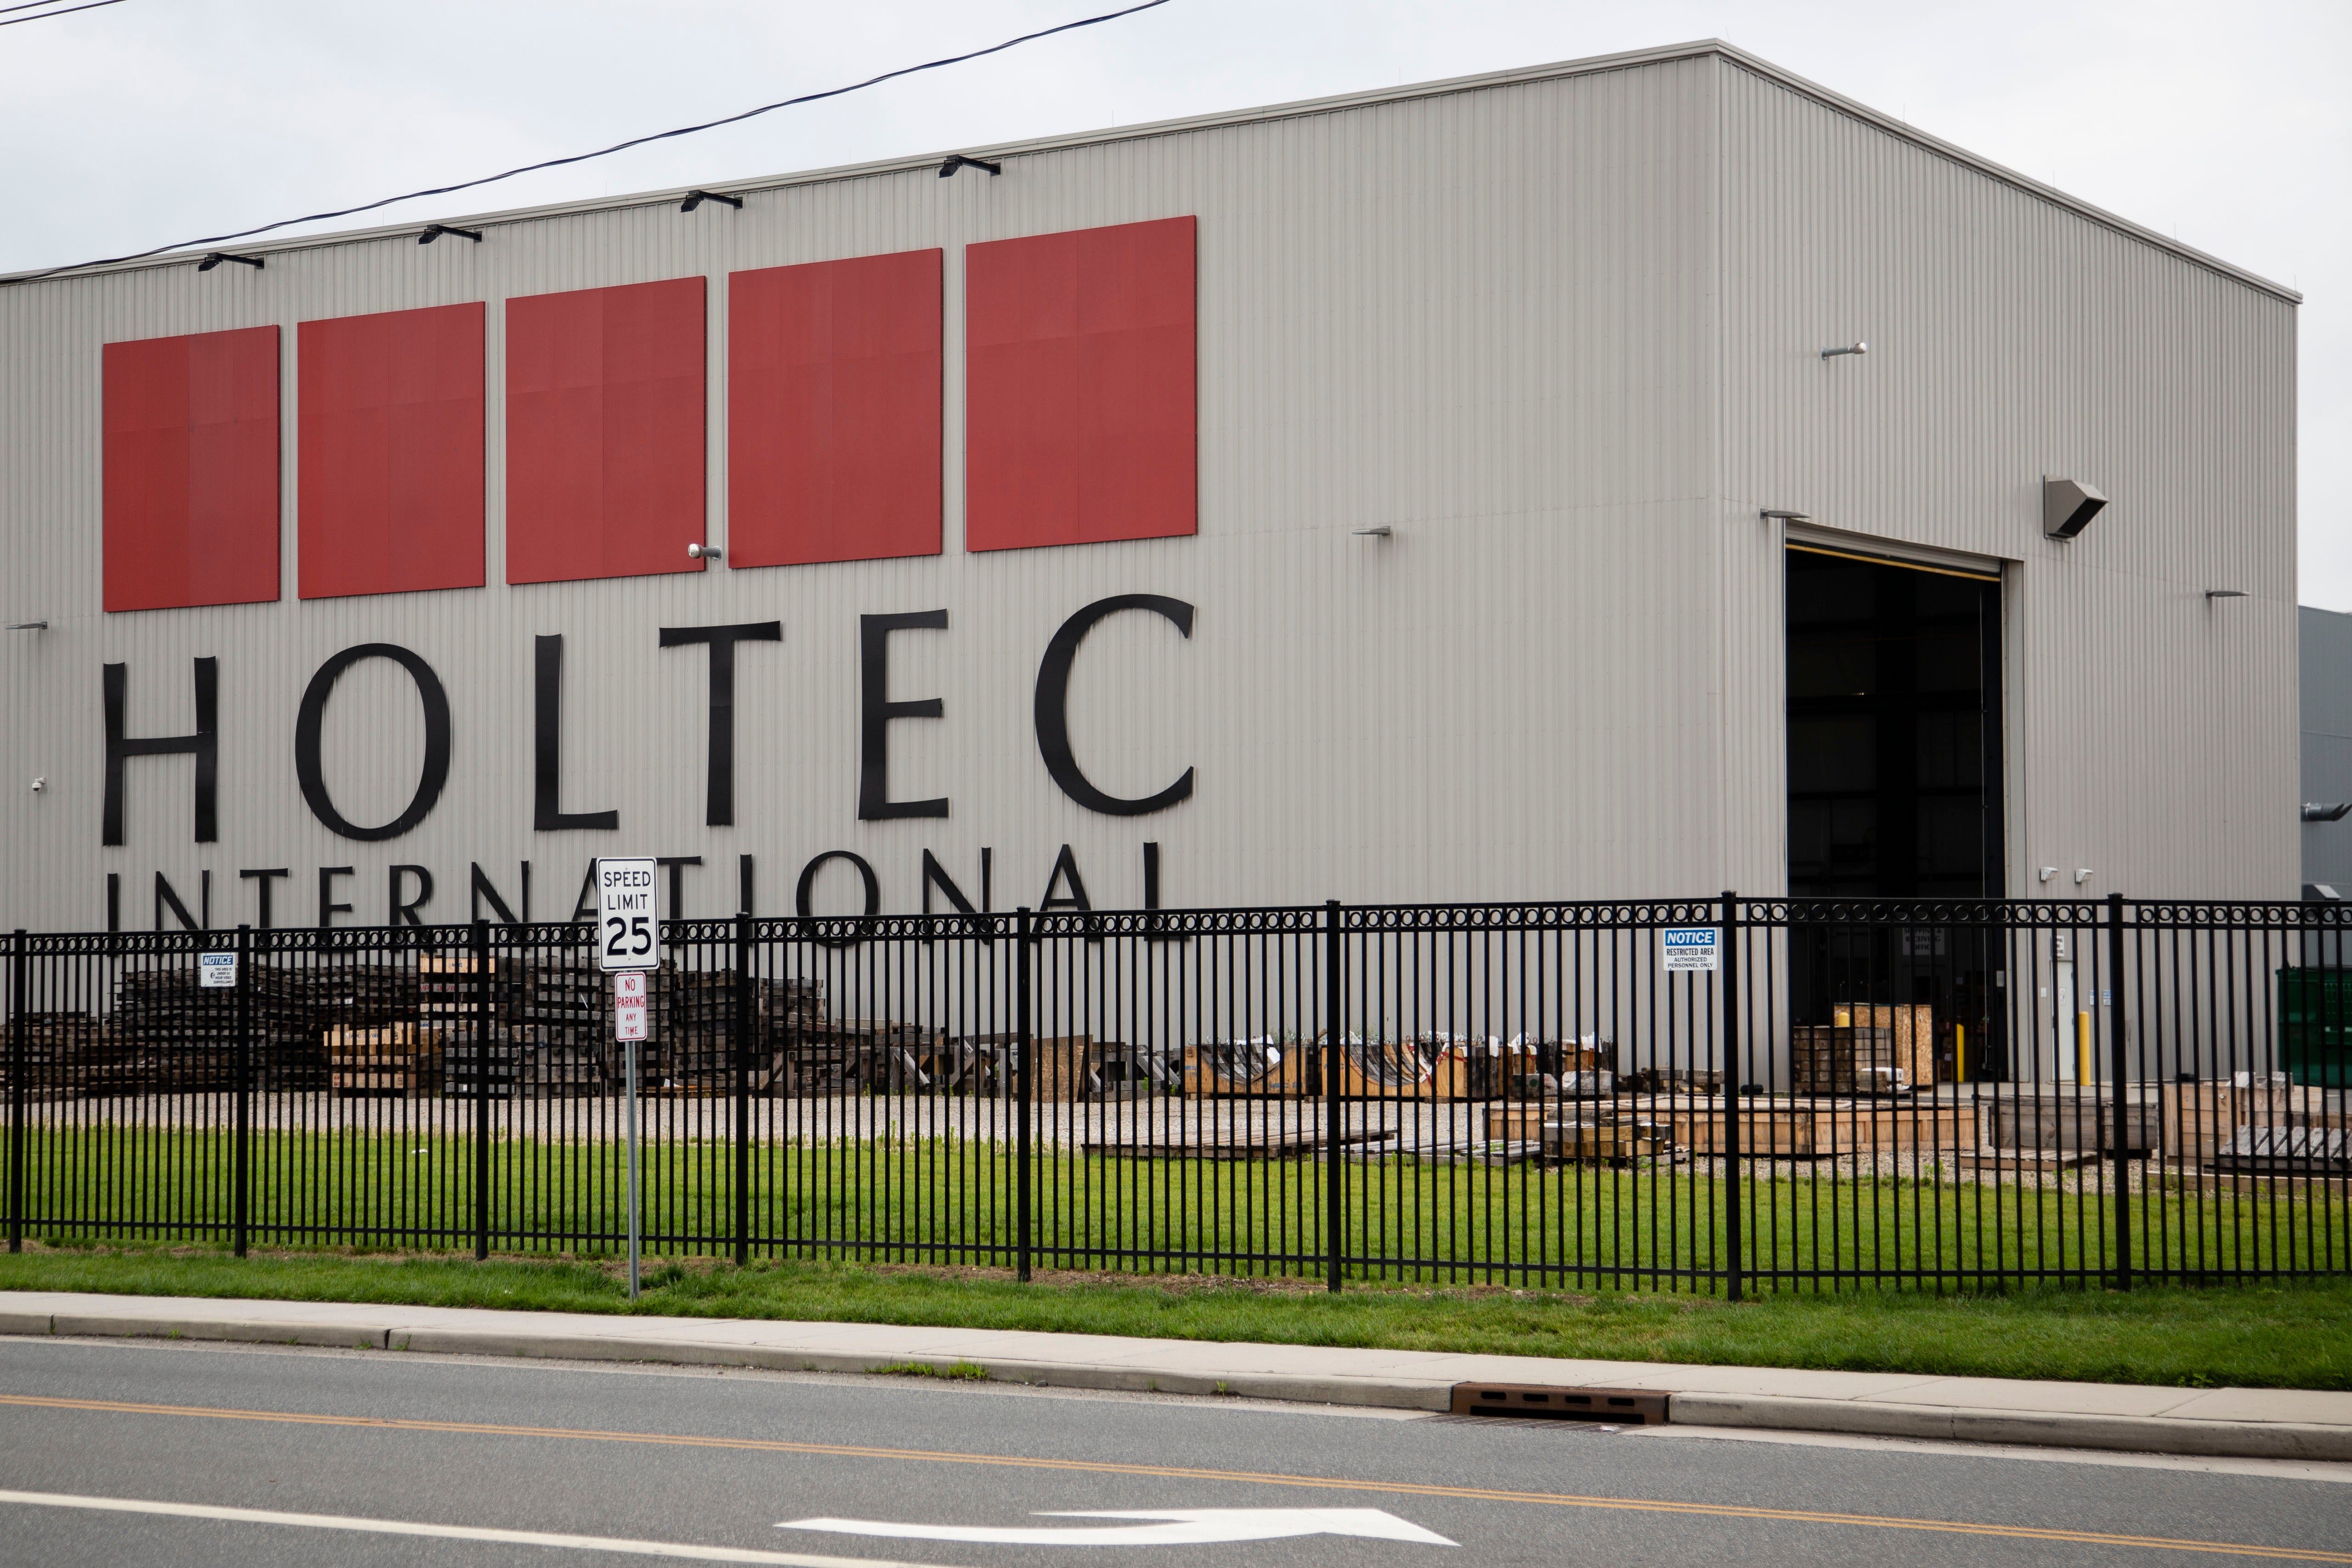 Holtec fined $5 million to avoid prosecution in N.J. tax credit case